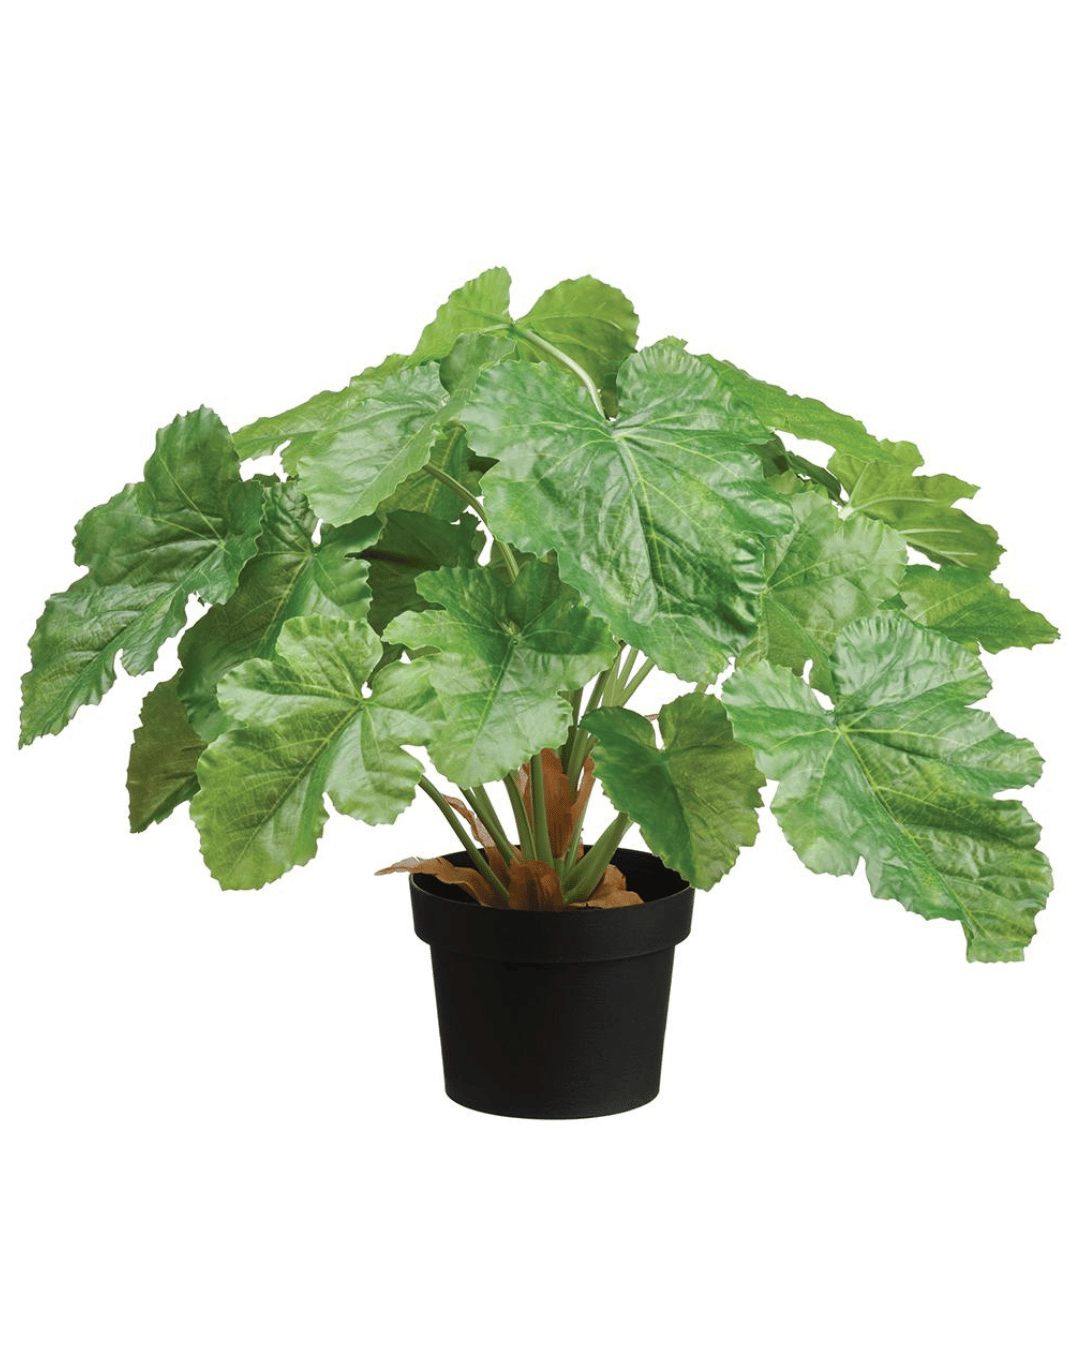 A lush green houseplant with large, lobed leaves in a black pot, isolated on a white background in a Scottsdale, Arizona bungalow - AllState Floral And Craft 18.75&quot; Pelargonium Plant in Plastic Pot.